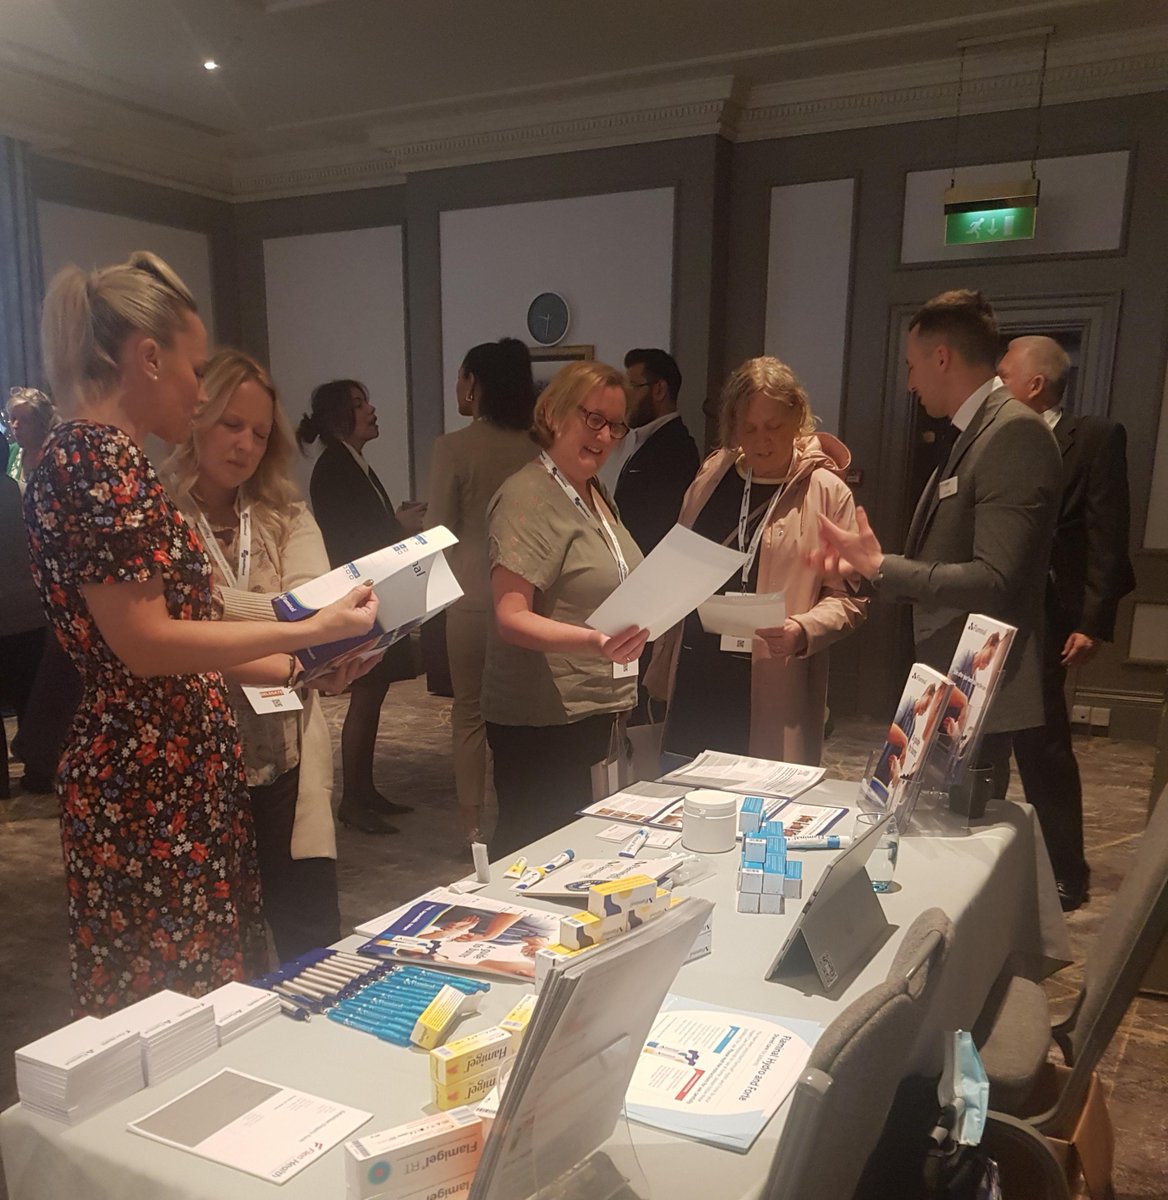 From today until the 6th May, you can find us at the BBA 54th Annual Meeting at the Royal Marriot Bristol! Come and have a look to get in touch with our representatives, our new materials and much more! #BBA #Burns #Flaminal #FlamigelRT #FlenHealth #LiveTheLifeYouLove